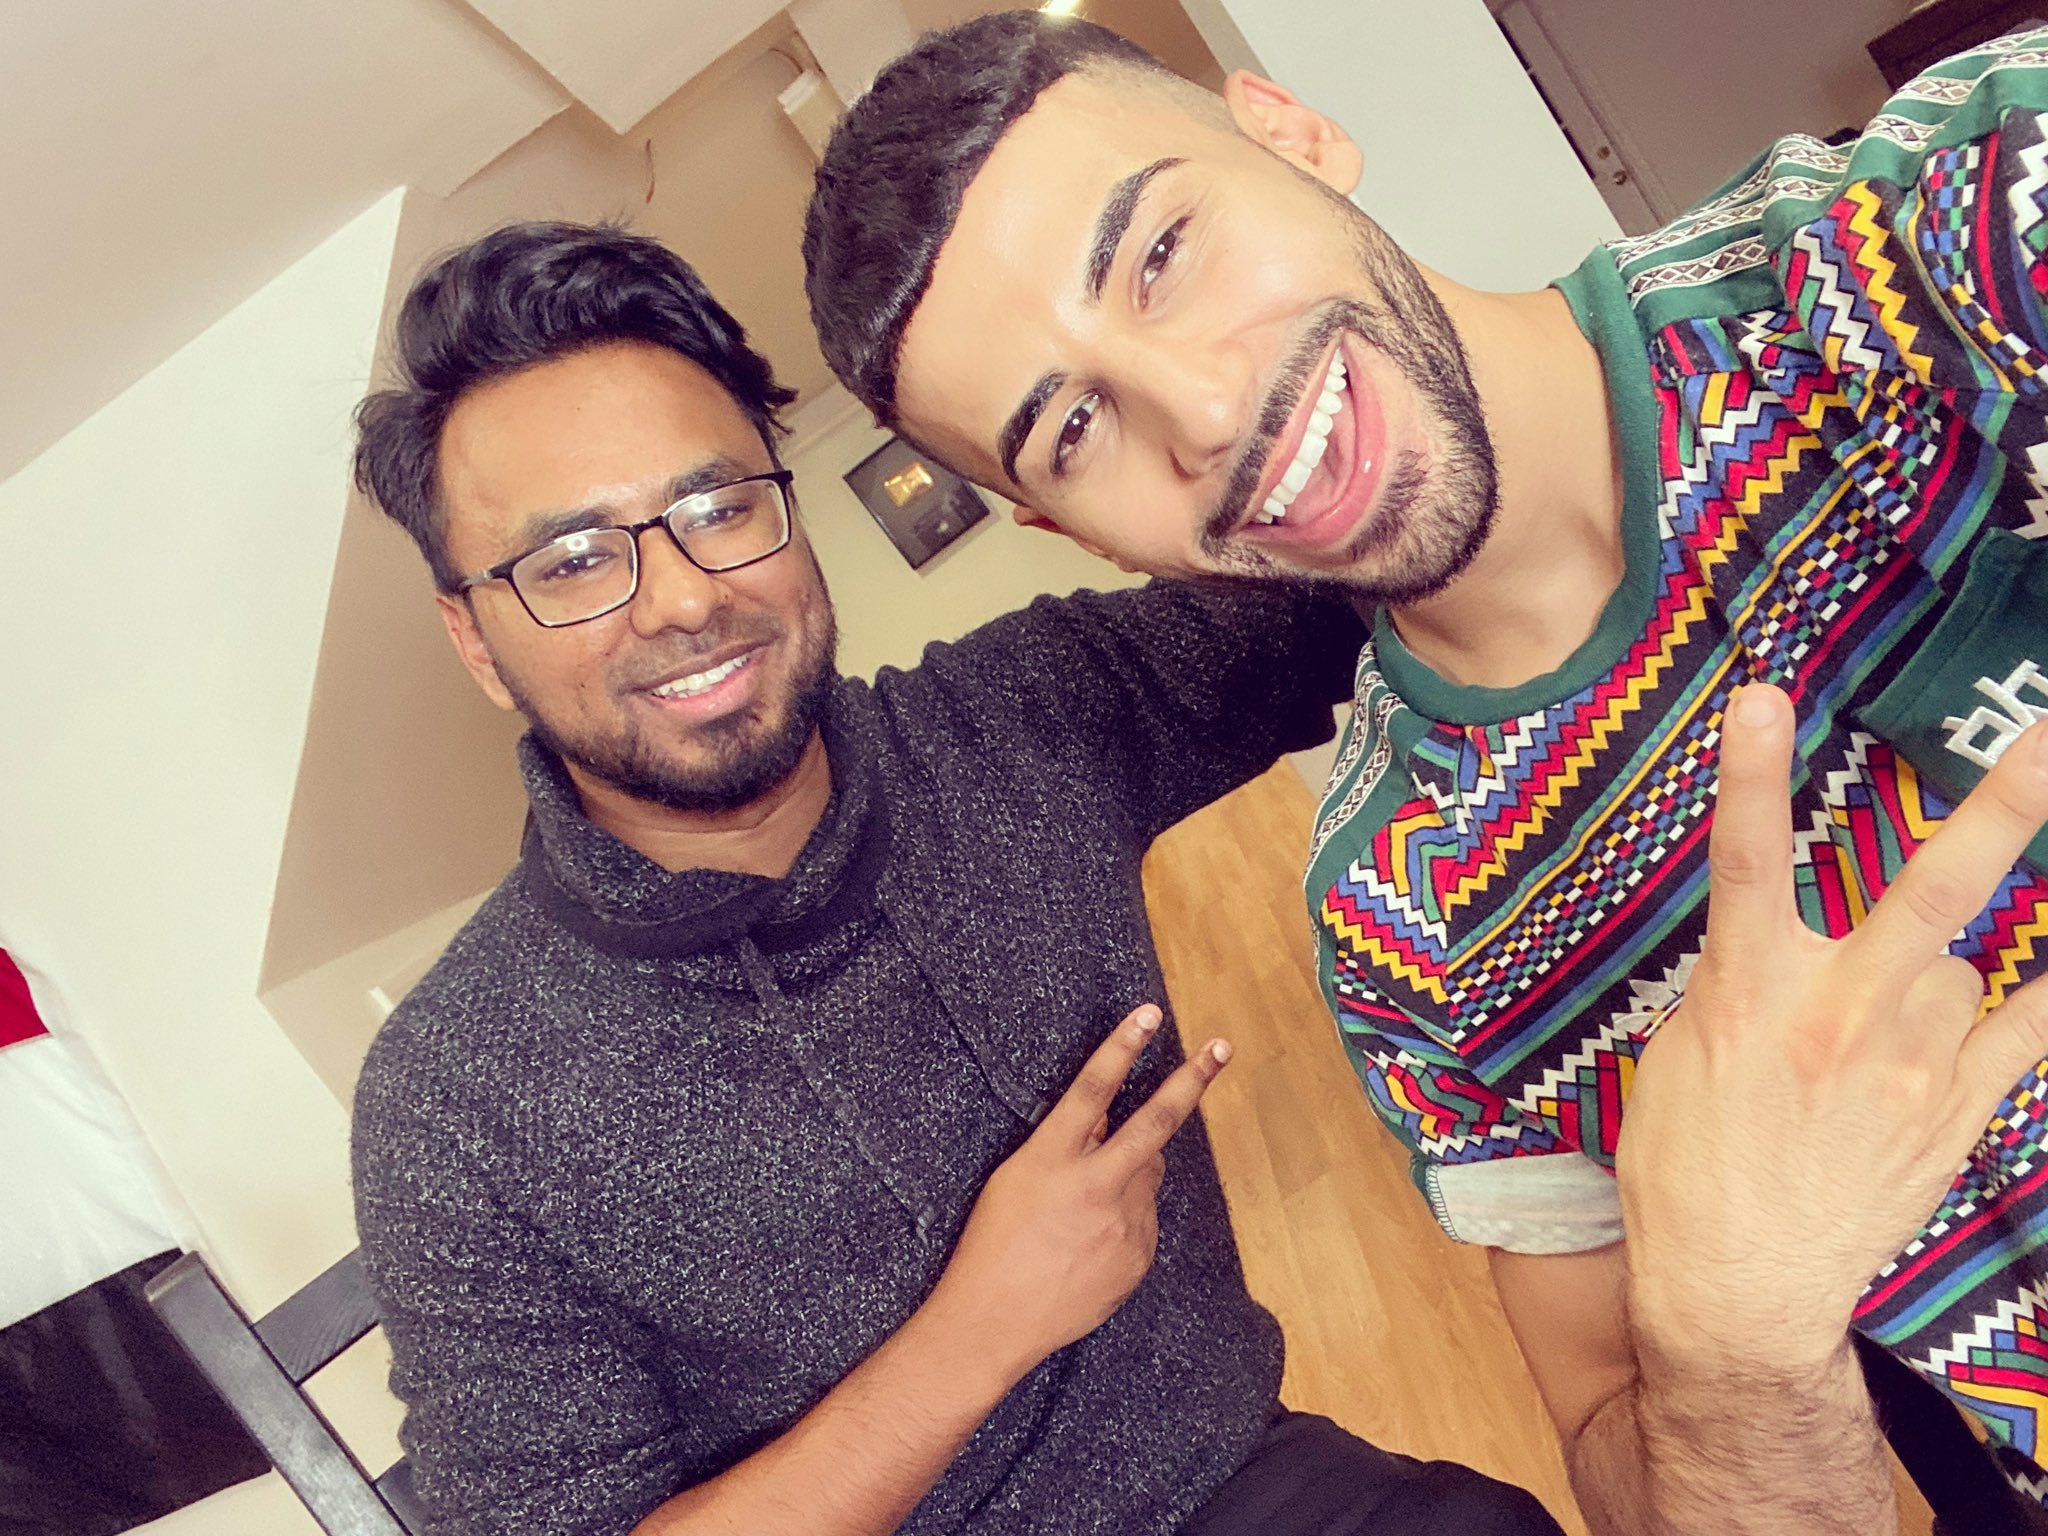 Adam Saleh on Twitter: Hey wassup it's been a while :) x. 